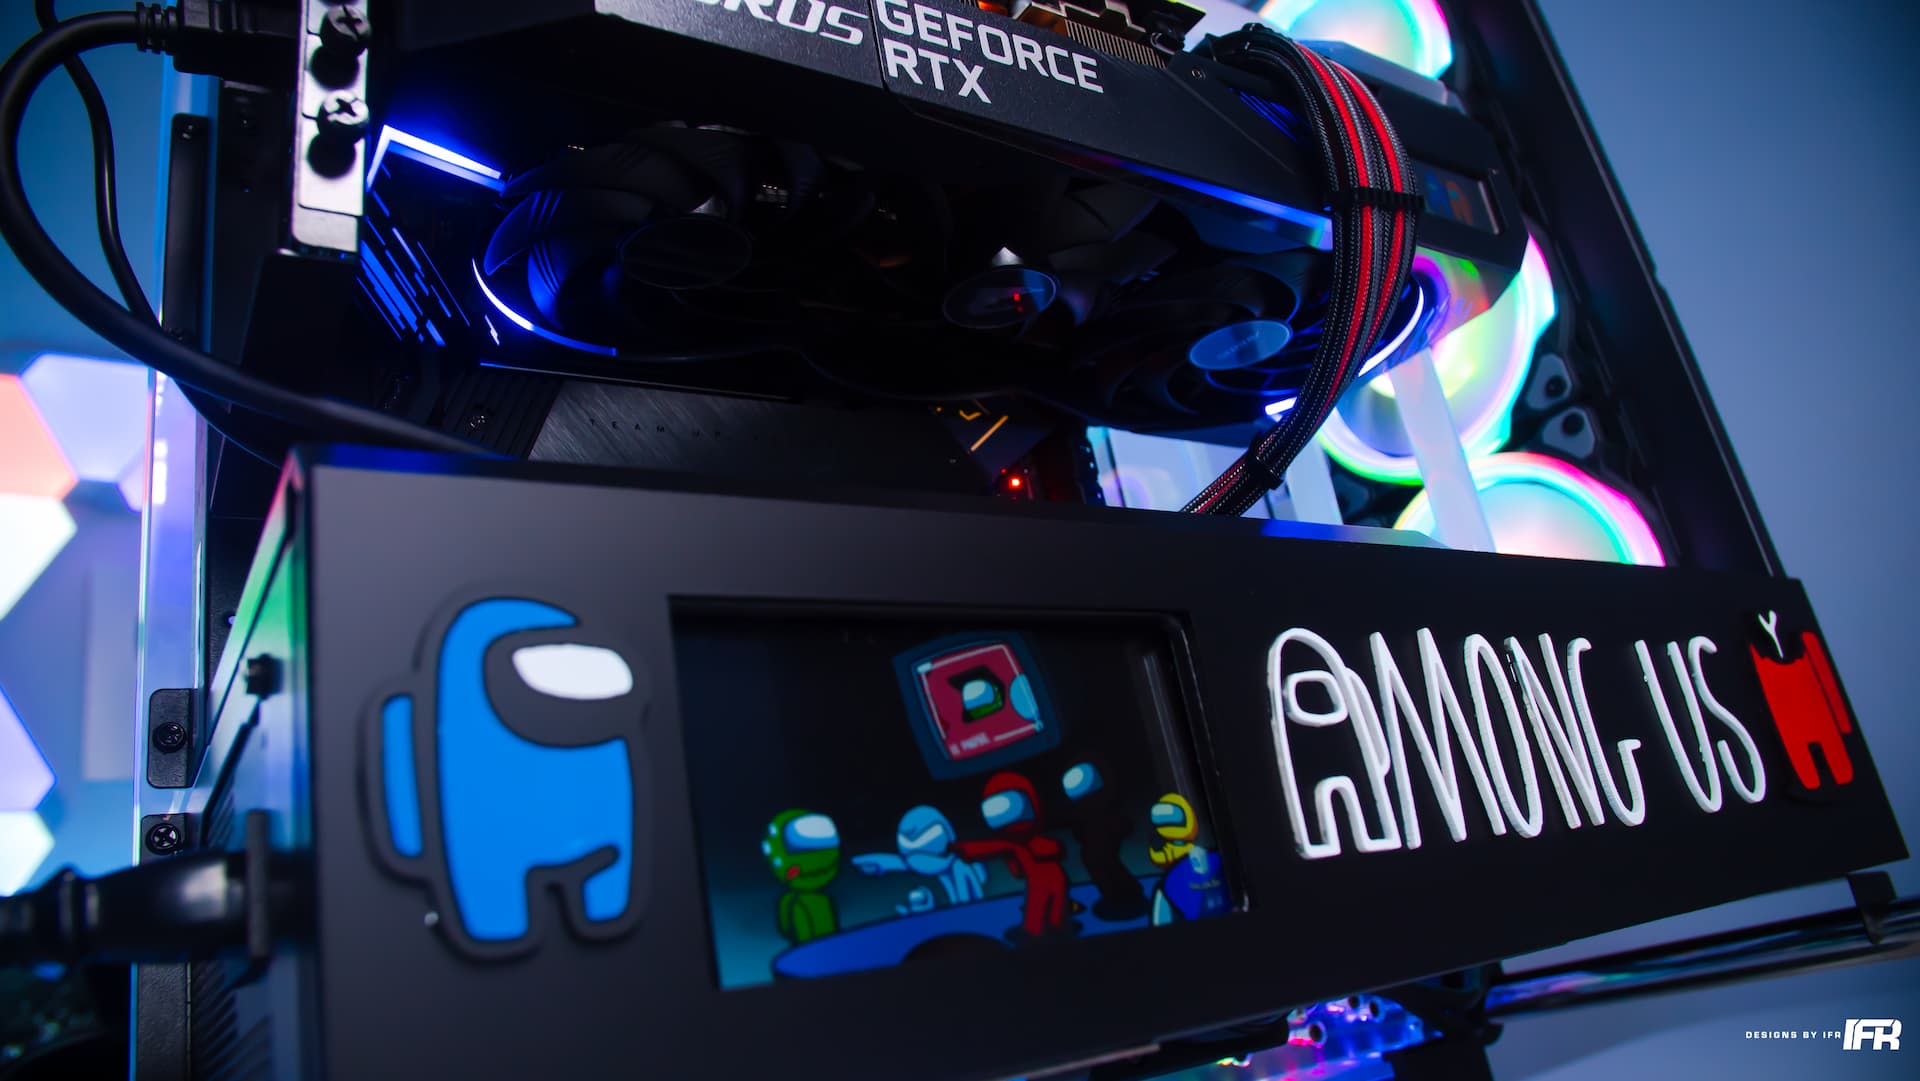 Among Us PC Setup, There is 1 monster of a PC among us! Designs By IFR, By UNILAD Tech